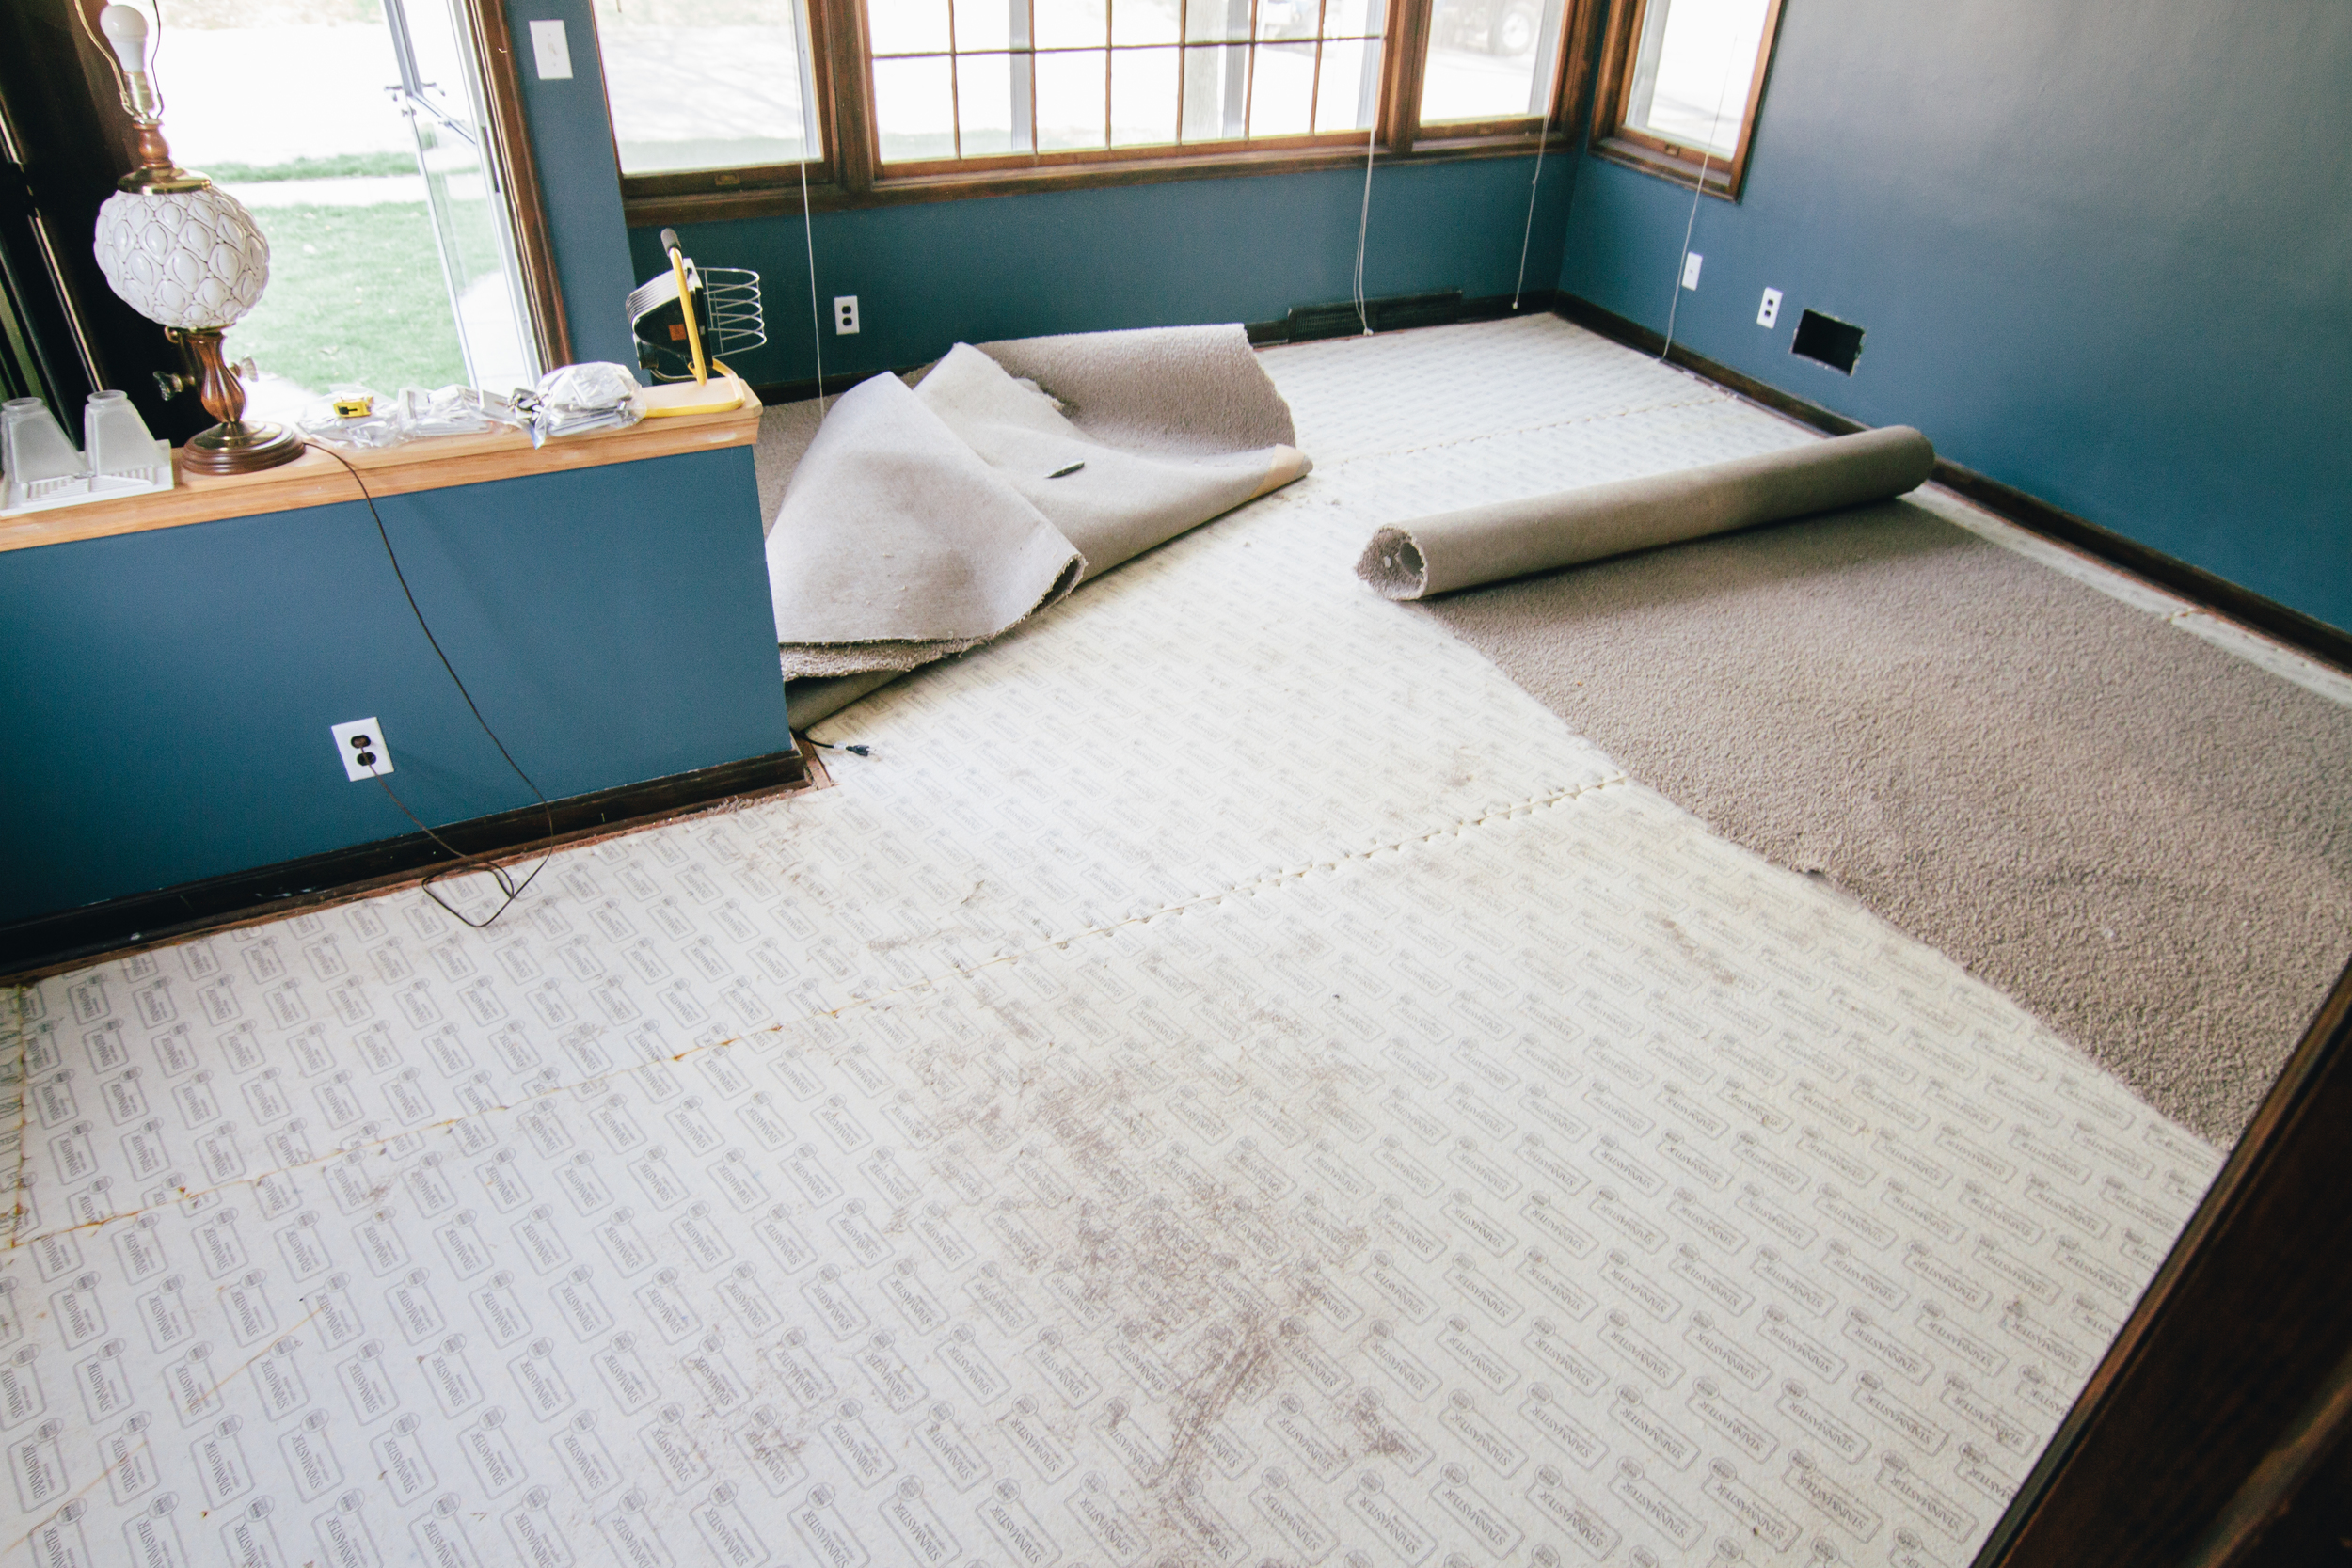  We tore up the carpet, hoping to reveal beautiful hardwood floors and we did! 